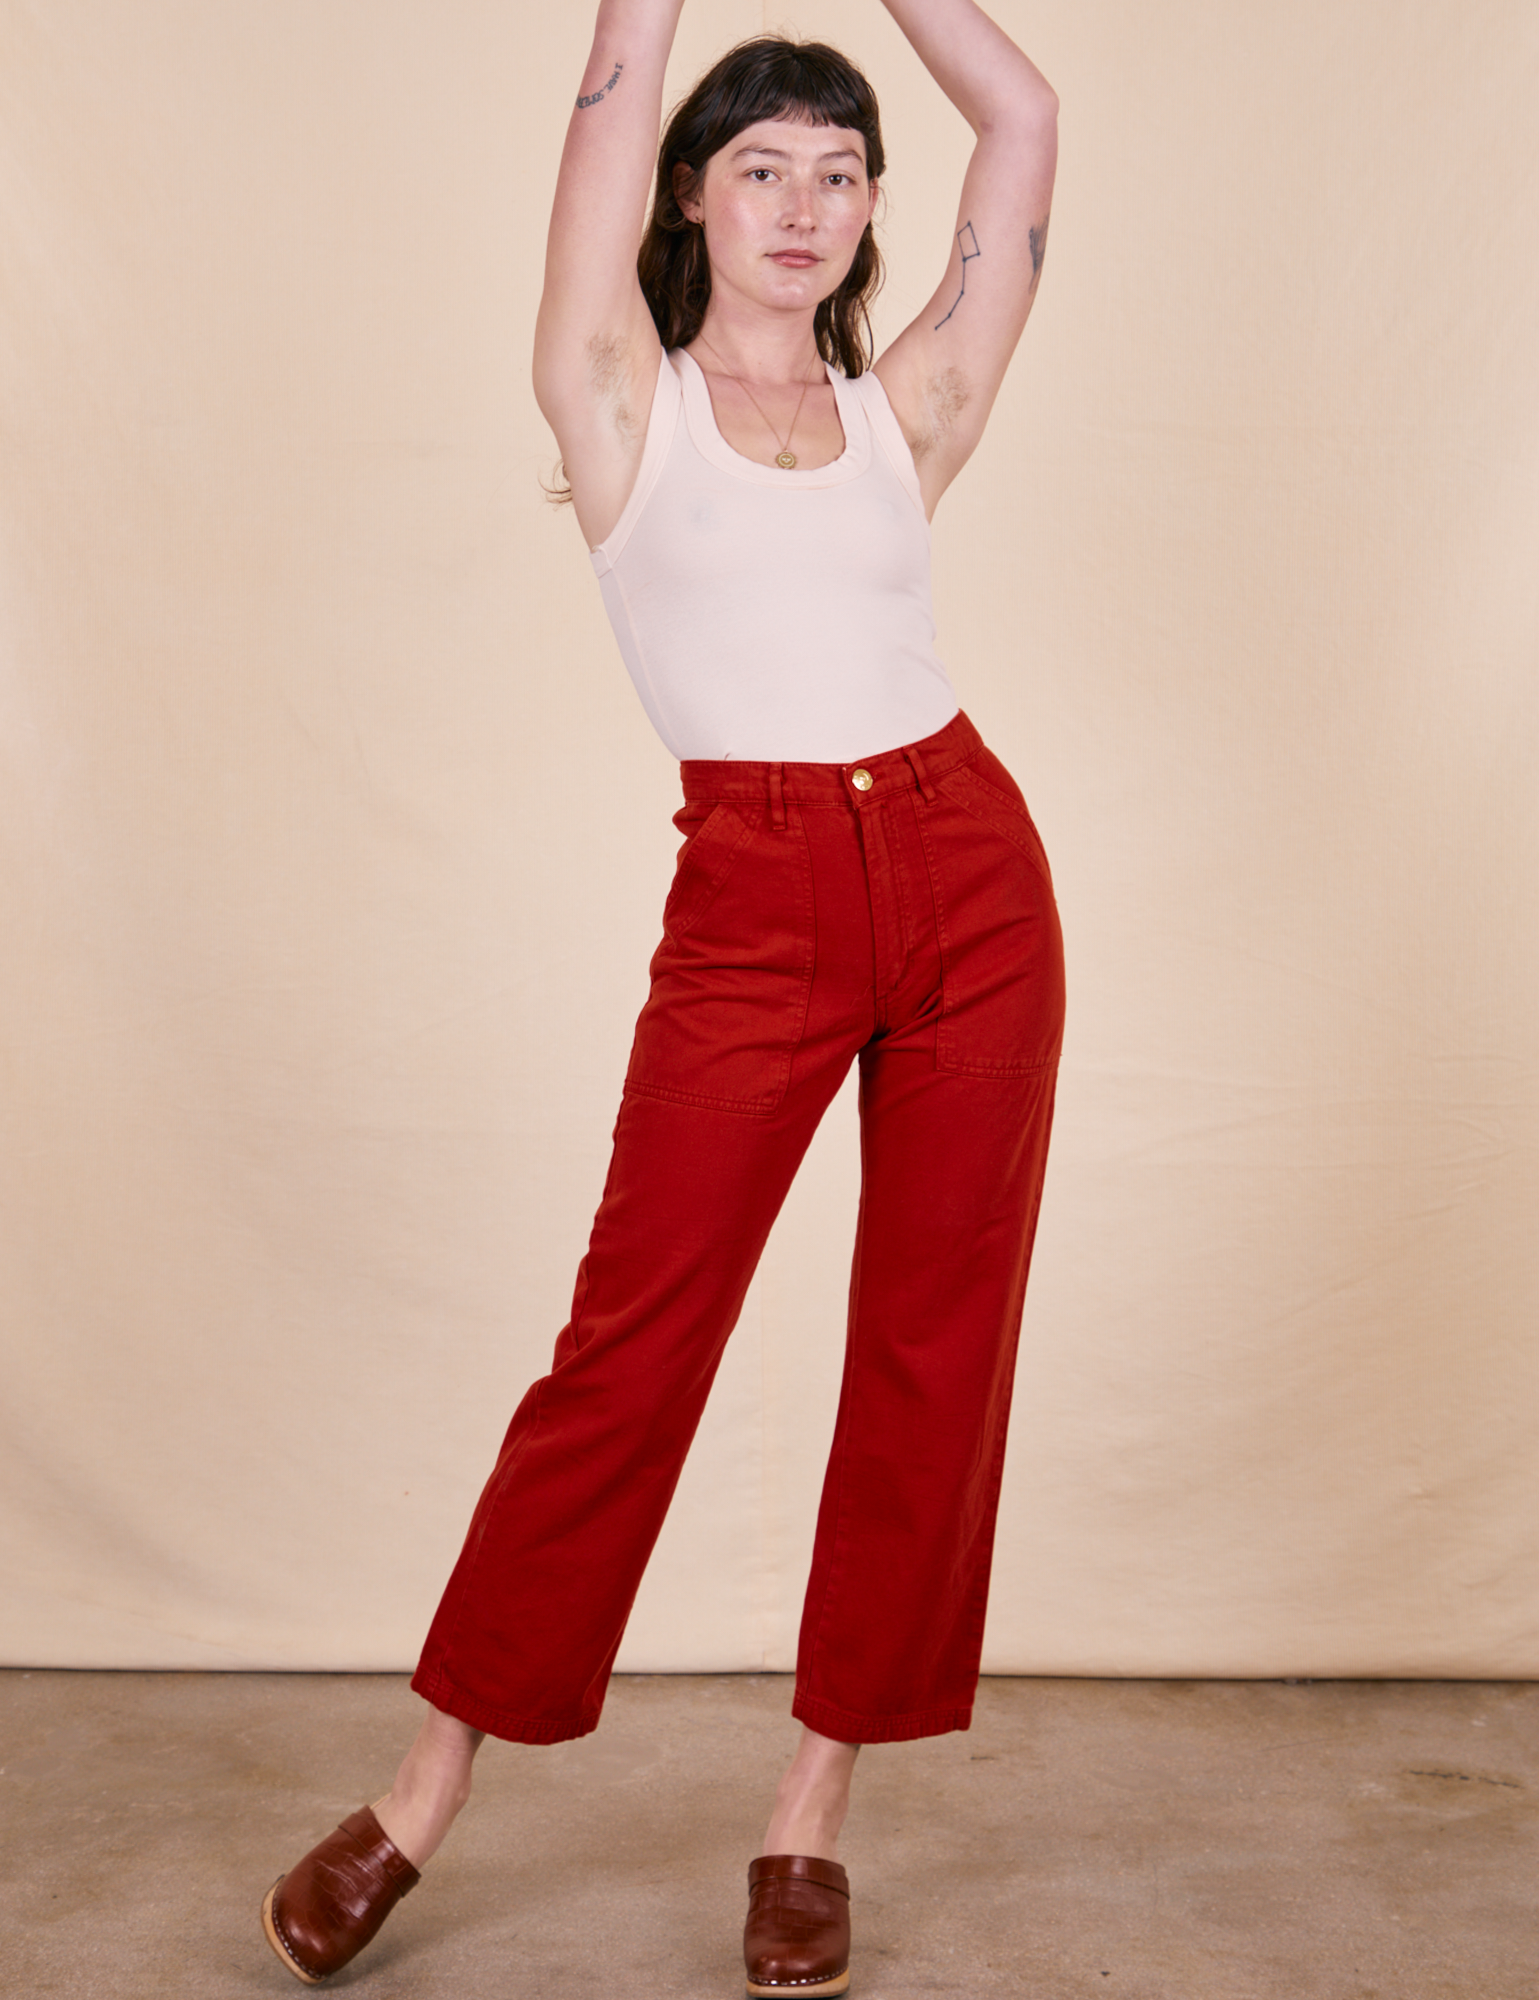 Alex is 5'8" and wearing XS Work Pants in Paprika paired with vintage off-white Tank Top